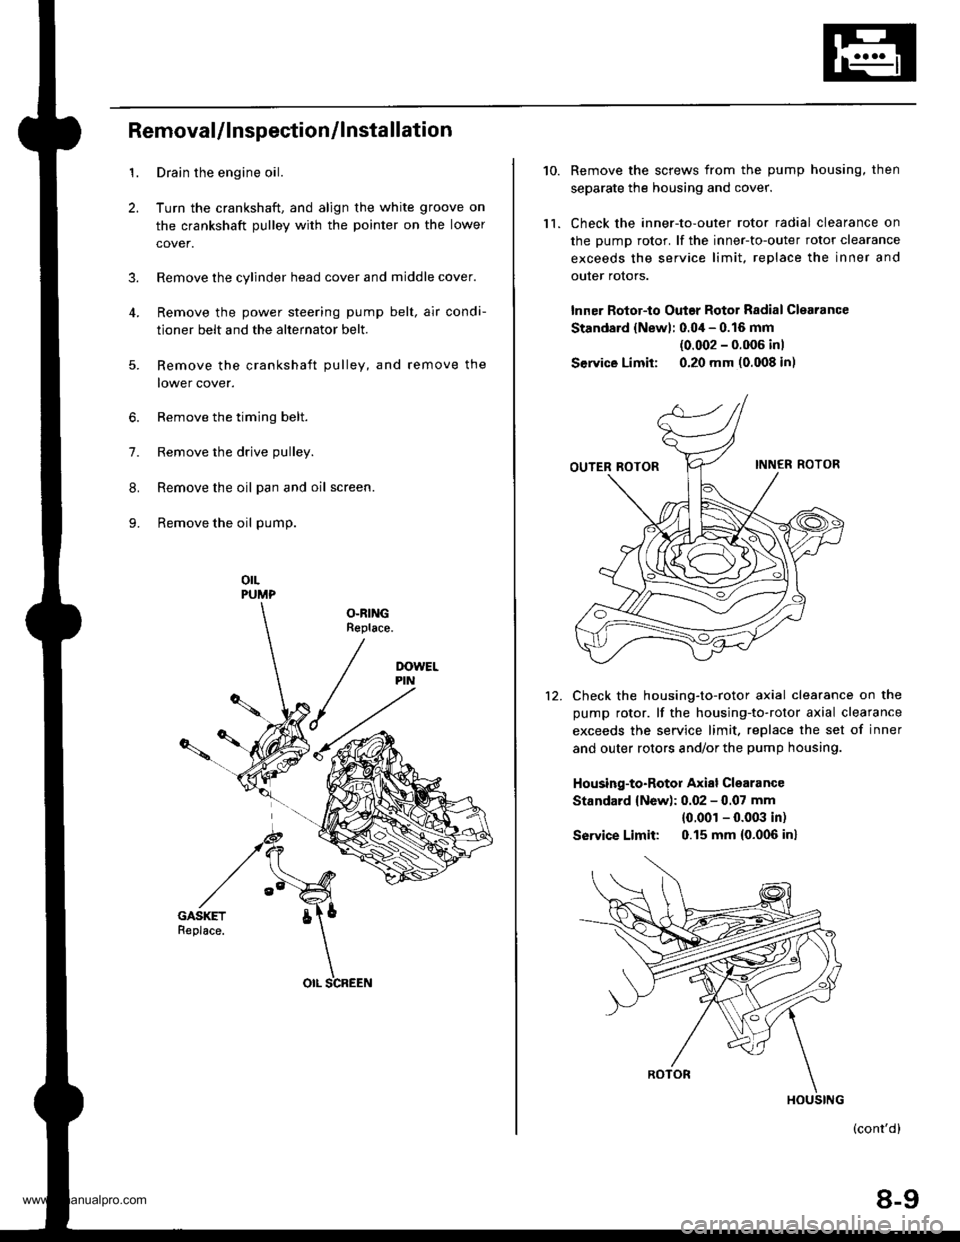 HONDA CR-V 2000 RD1-RD3 / 1.G Service Manual 
1.
2.
3.
RemovaUlnspection/lnstallation
Drain the engine oil.
Turn the crankshaft, and align the white groove on
the crankshaft pulley with the pointer on the lower
cover.
Remove the cylinder head co